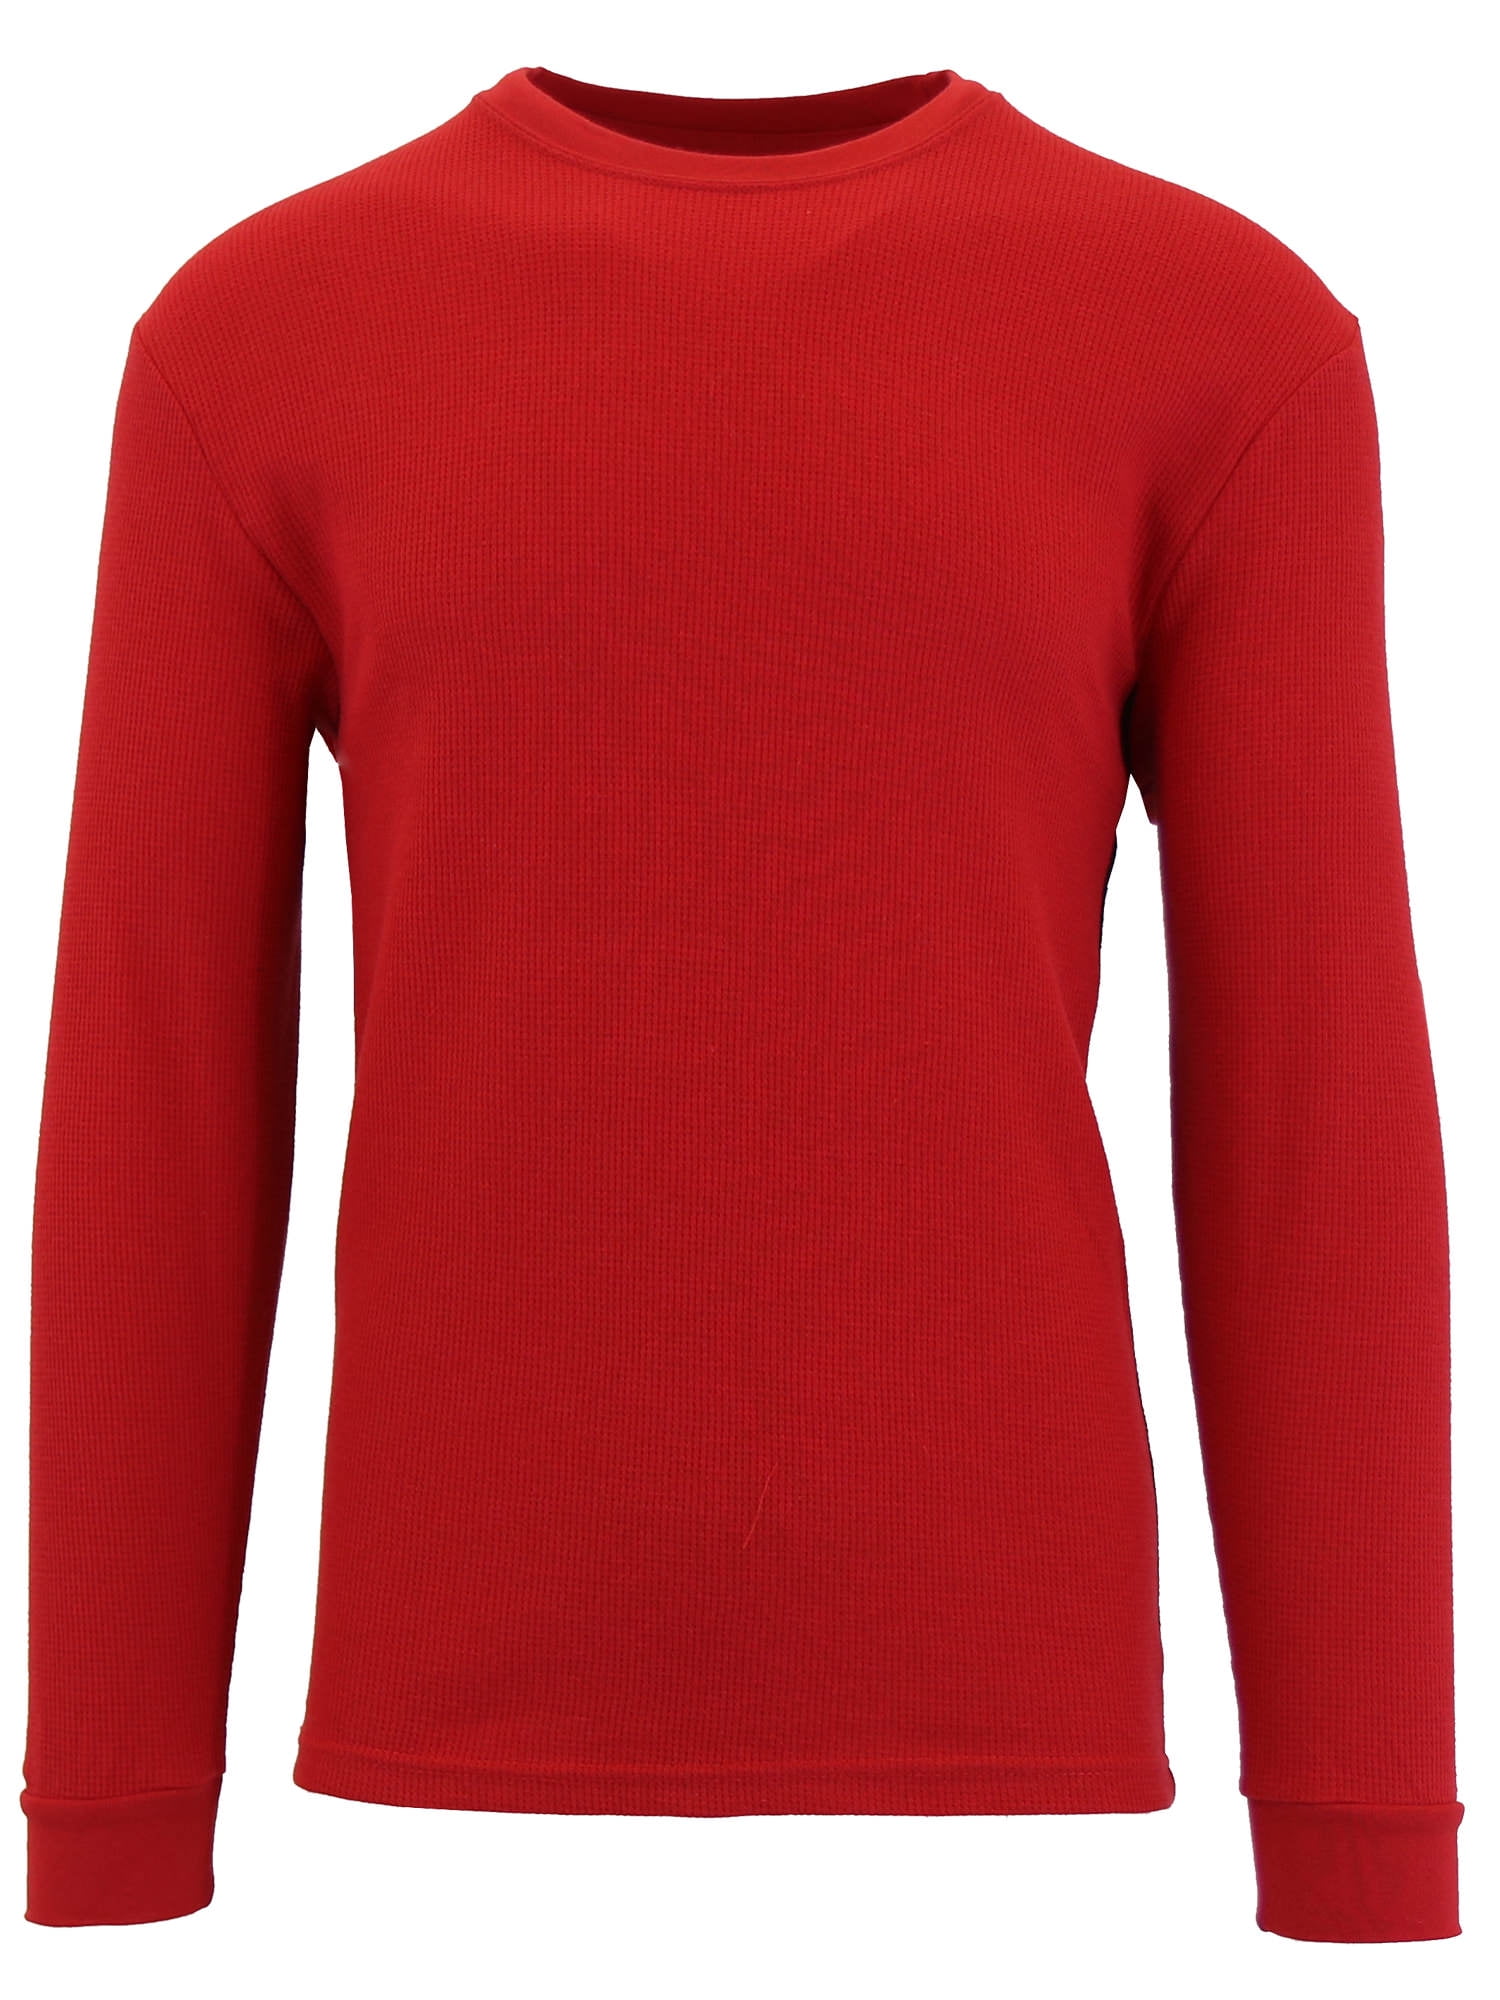 Men's Waffle-Knit Thermal Shirts With Contast Side Trim - Walmart.com